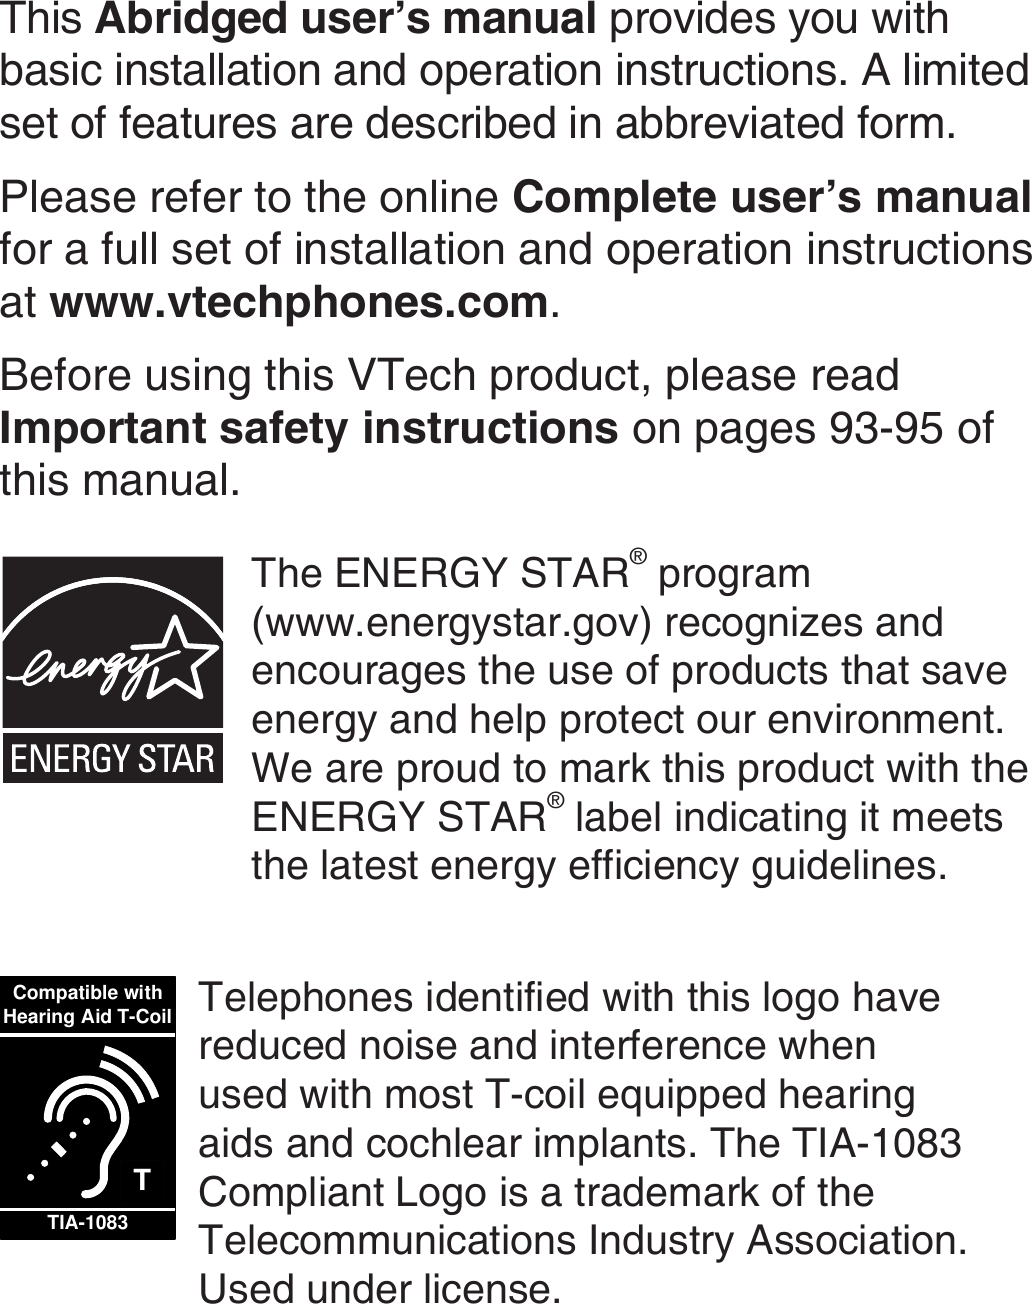 This Abridged user’s manual provides you with basic installation and operation instructions. A limited set of features are described in abbreviated form.Please refer to the online Complete user’s manual for a full set of installation and operation instructions at www.vtechphones.com.Before using this VTech product, please read Important safety instructions on pages 93-95 of this manual.The ENERGY STAR® program  (www.energystar.gov) recognizes and encourages the use of products that save energy and help protect our environment. We are proud to mark this product with the ENERGY STAR® label indicating it meets the latest energy efficiency guidelines.TCompatible withHearing Aid T-CoilTIA-1083Telephones identified with this logo have reduced noise and interference when used with most T-coil equipped hearing aids and cochlear implants. The TIA-1083 Compliant Logo is a trademark of the Telecommunications Industry Association. Used under license.